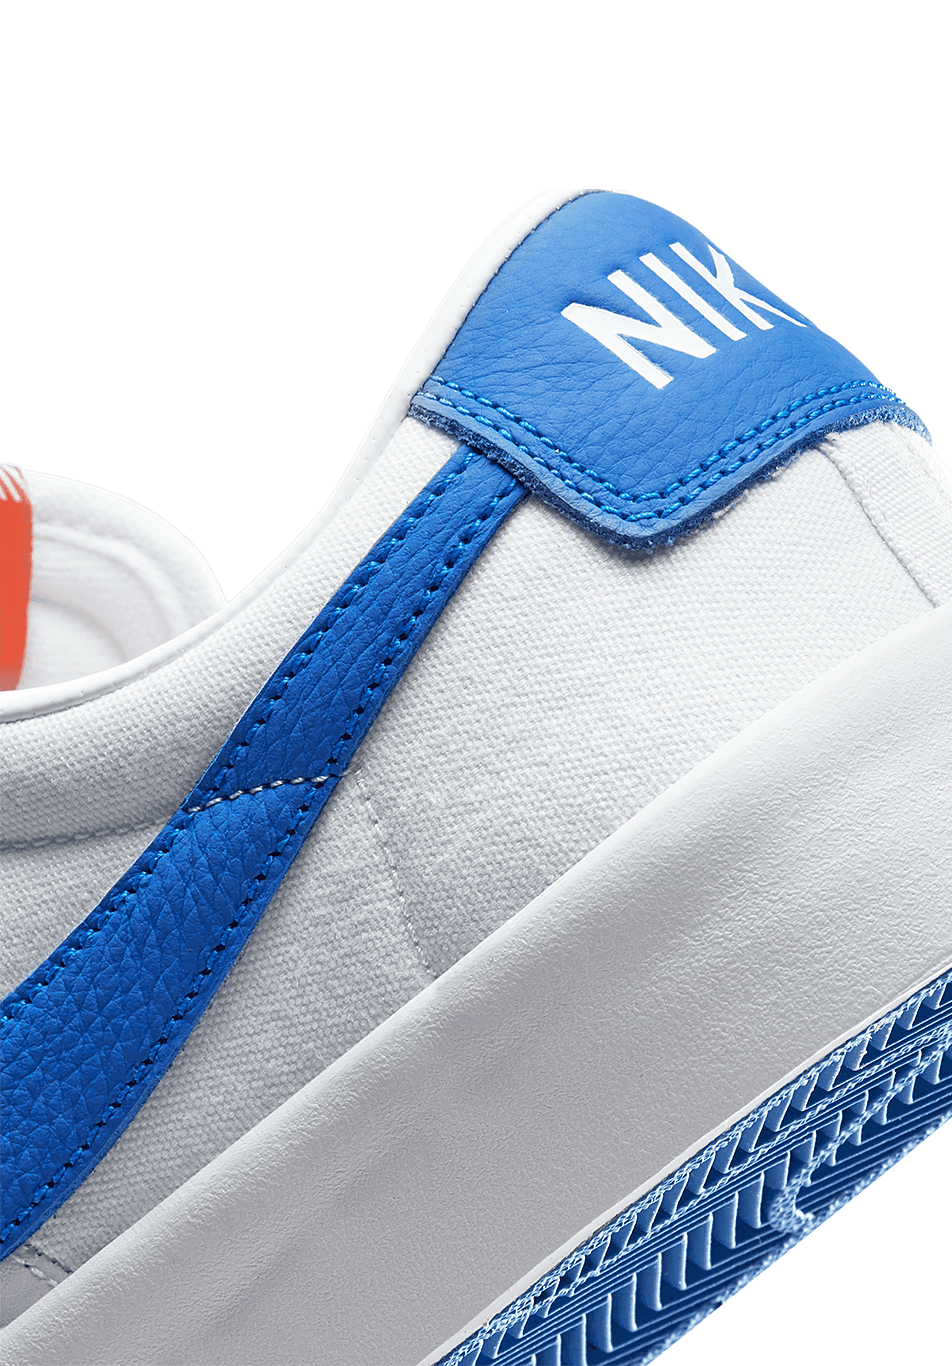 Nike SB ZOOM Blazer Low Pro GT ISO White Varsity Royal DH5675-100 ONLINE ONLY